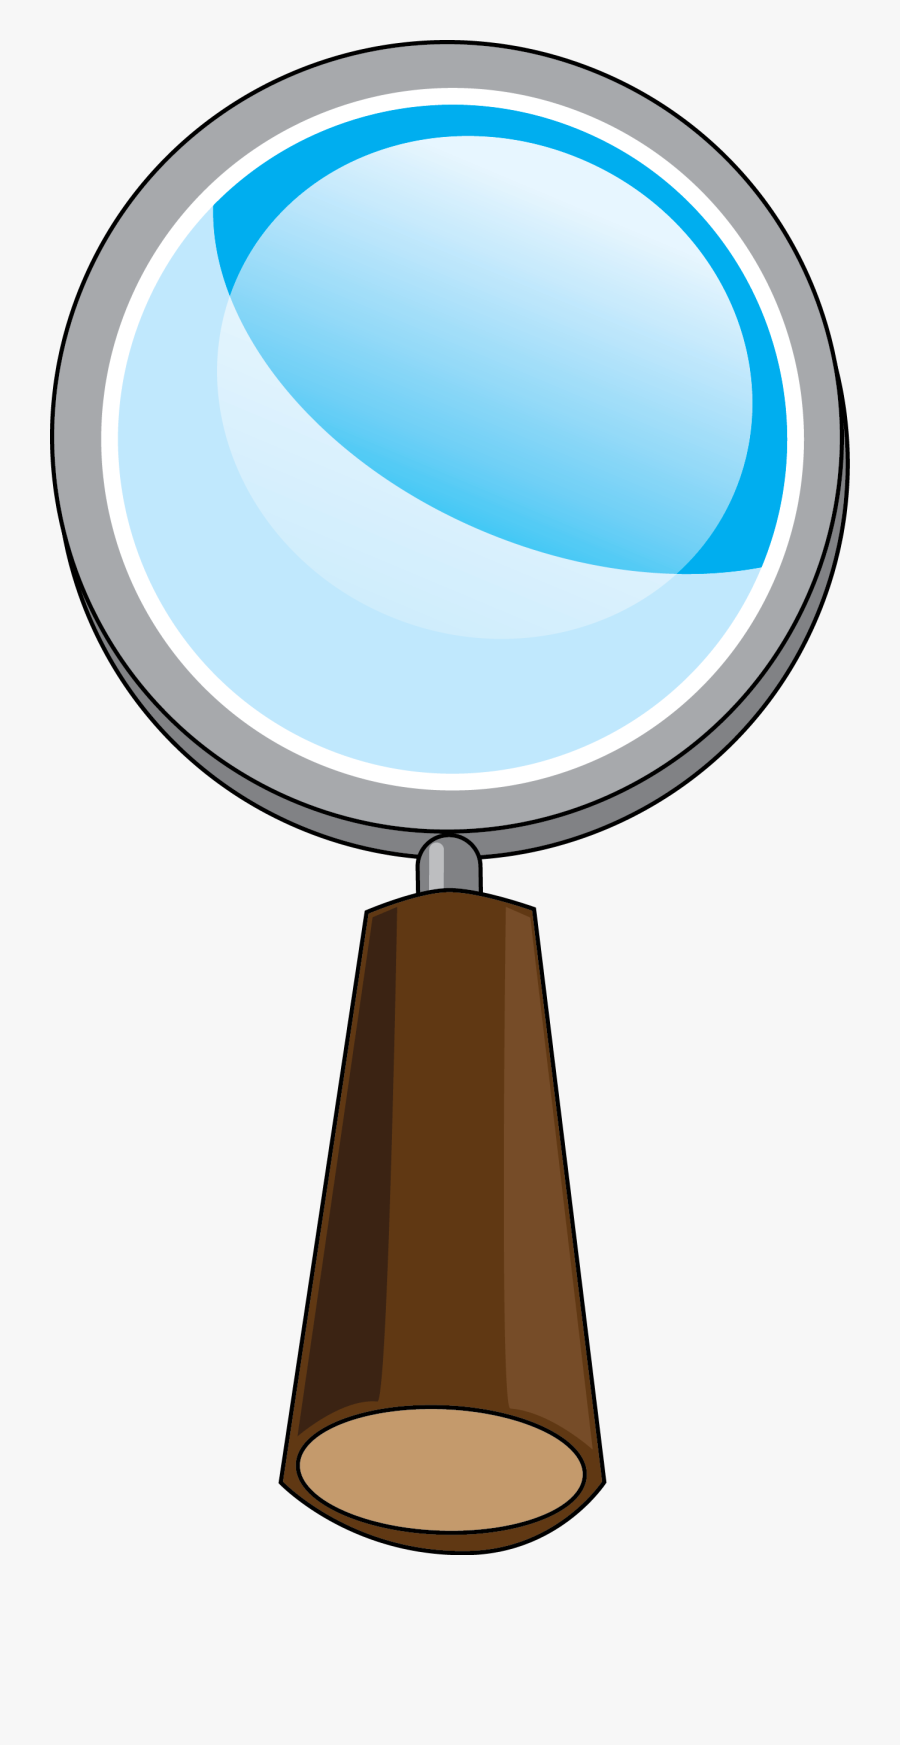 Clipart Science Magnifying Glass - Magnifying Glass Png Cartoon, Transparent Clipart